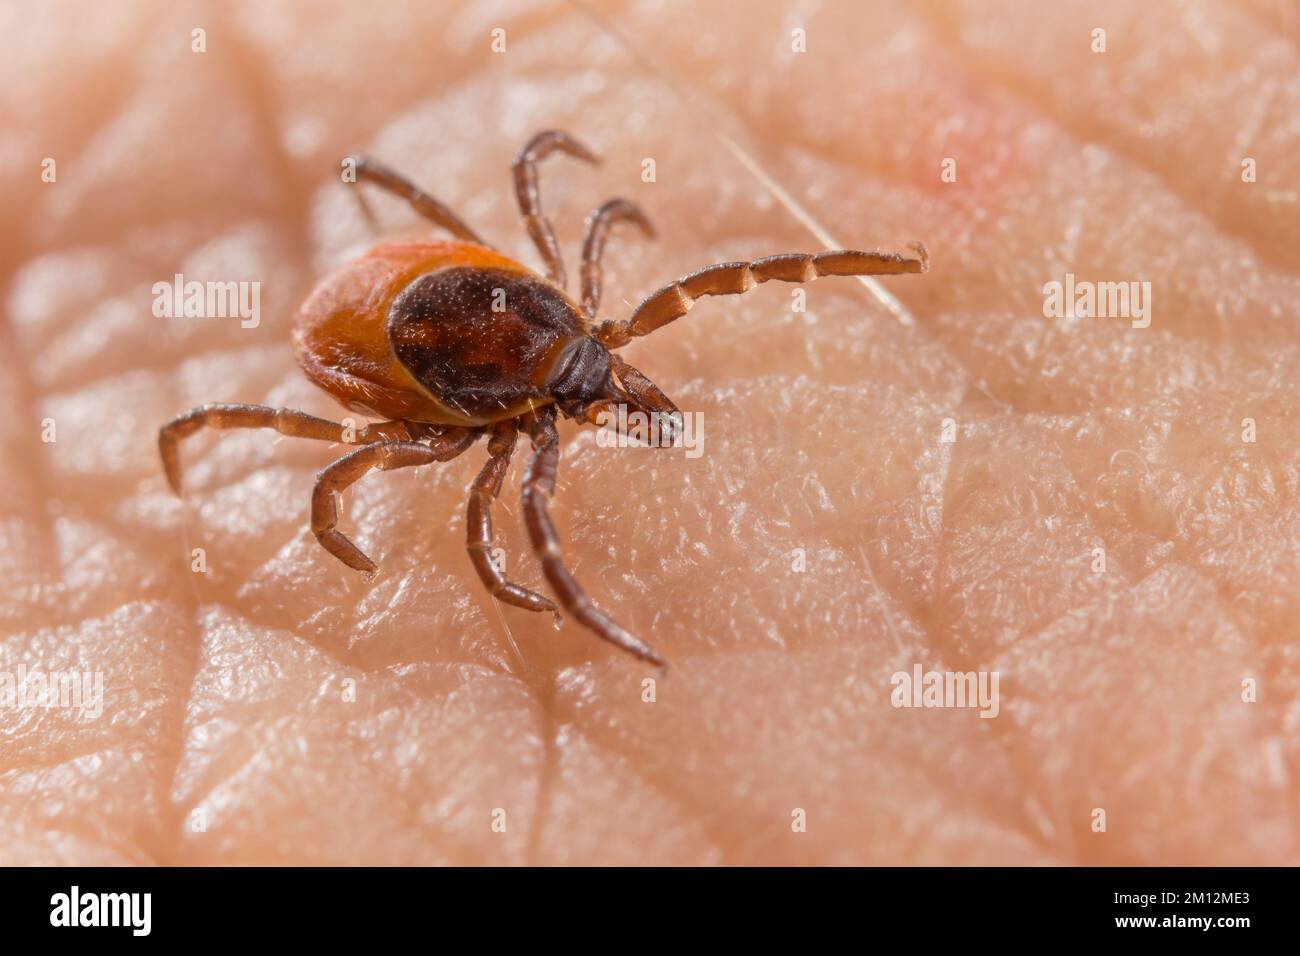 Close-up of deer tick on human skin detail in background. Ixodes ricinus or scapularis. Infectious diseases carrier. Encephalitis or Lyme borreliosis. Stock Photo